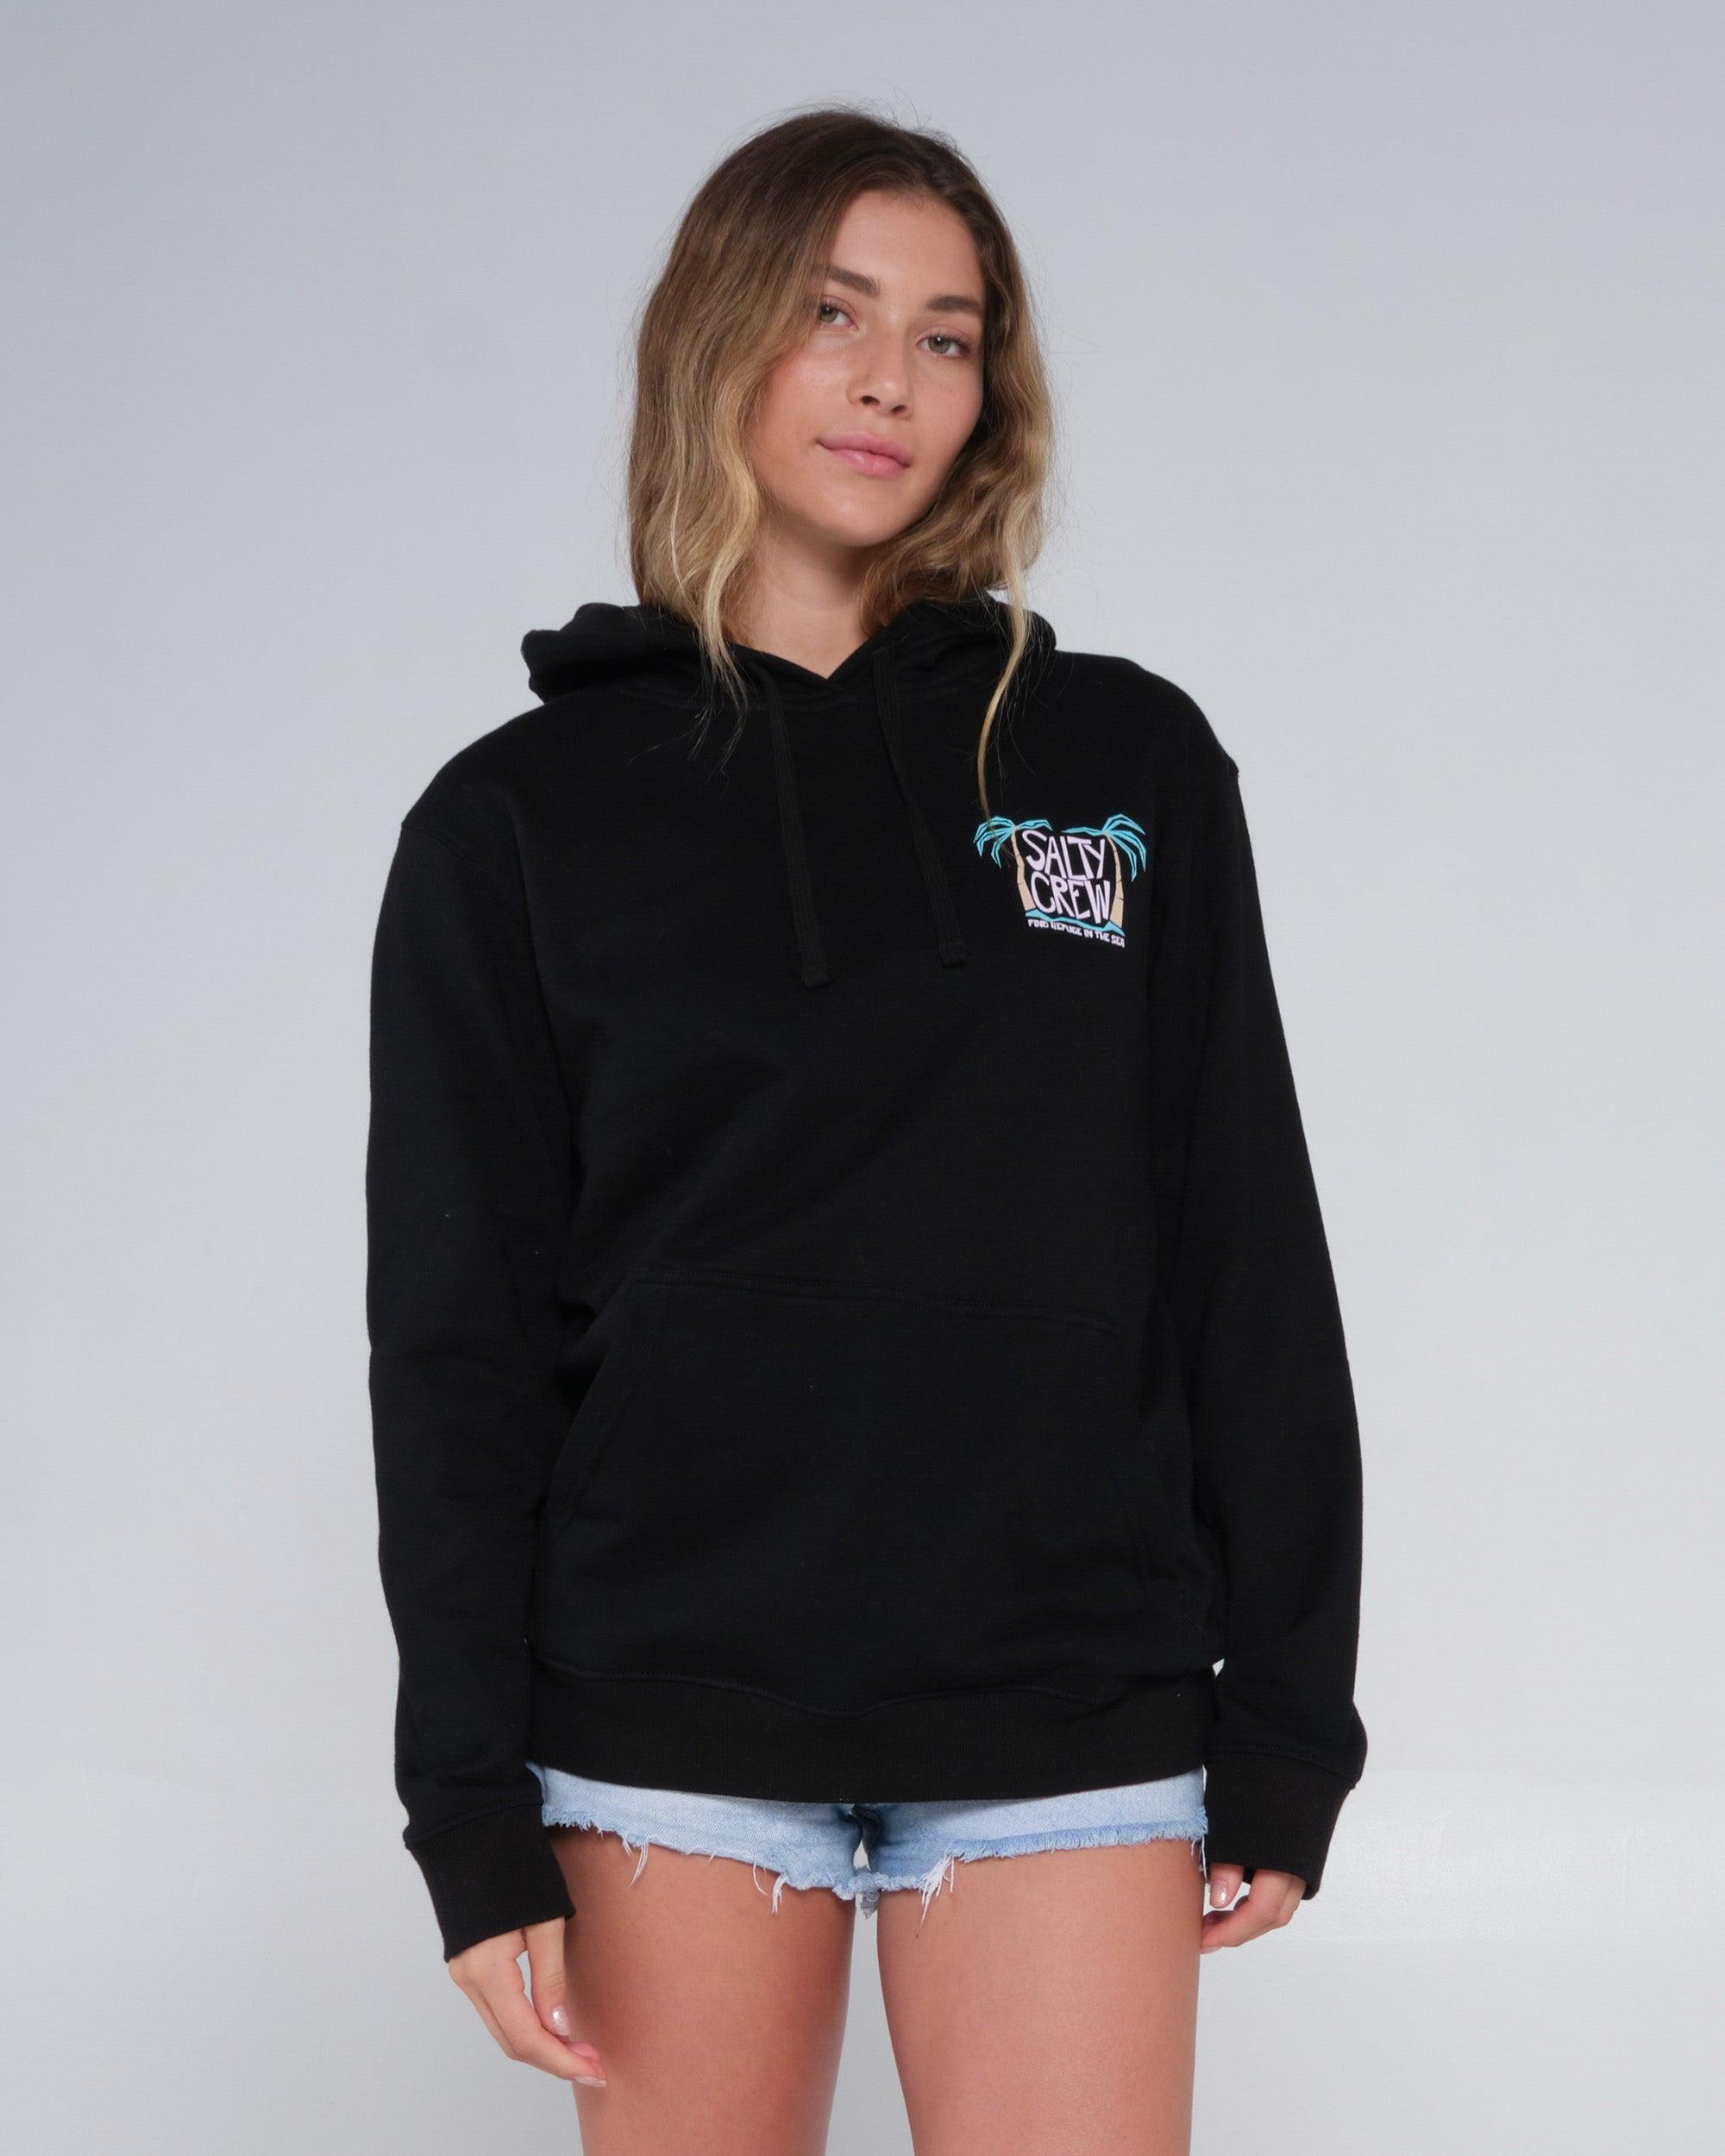 Postcard Hoody - Black - Purpose-Built / Home of the Trades